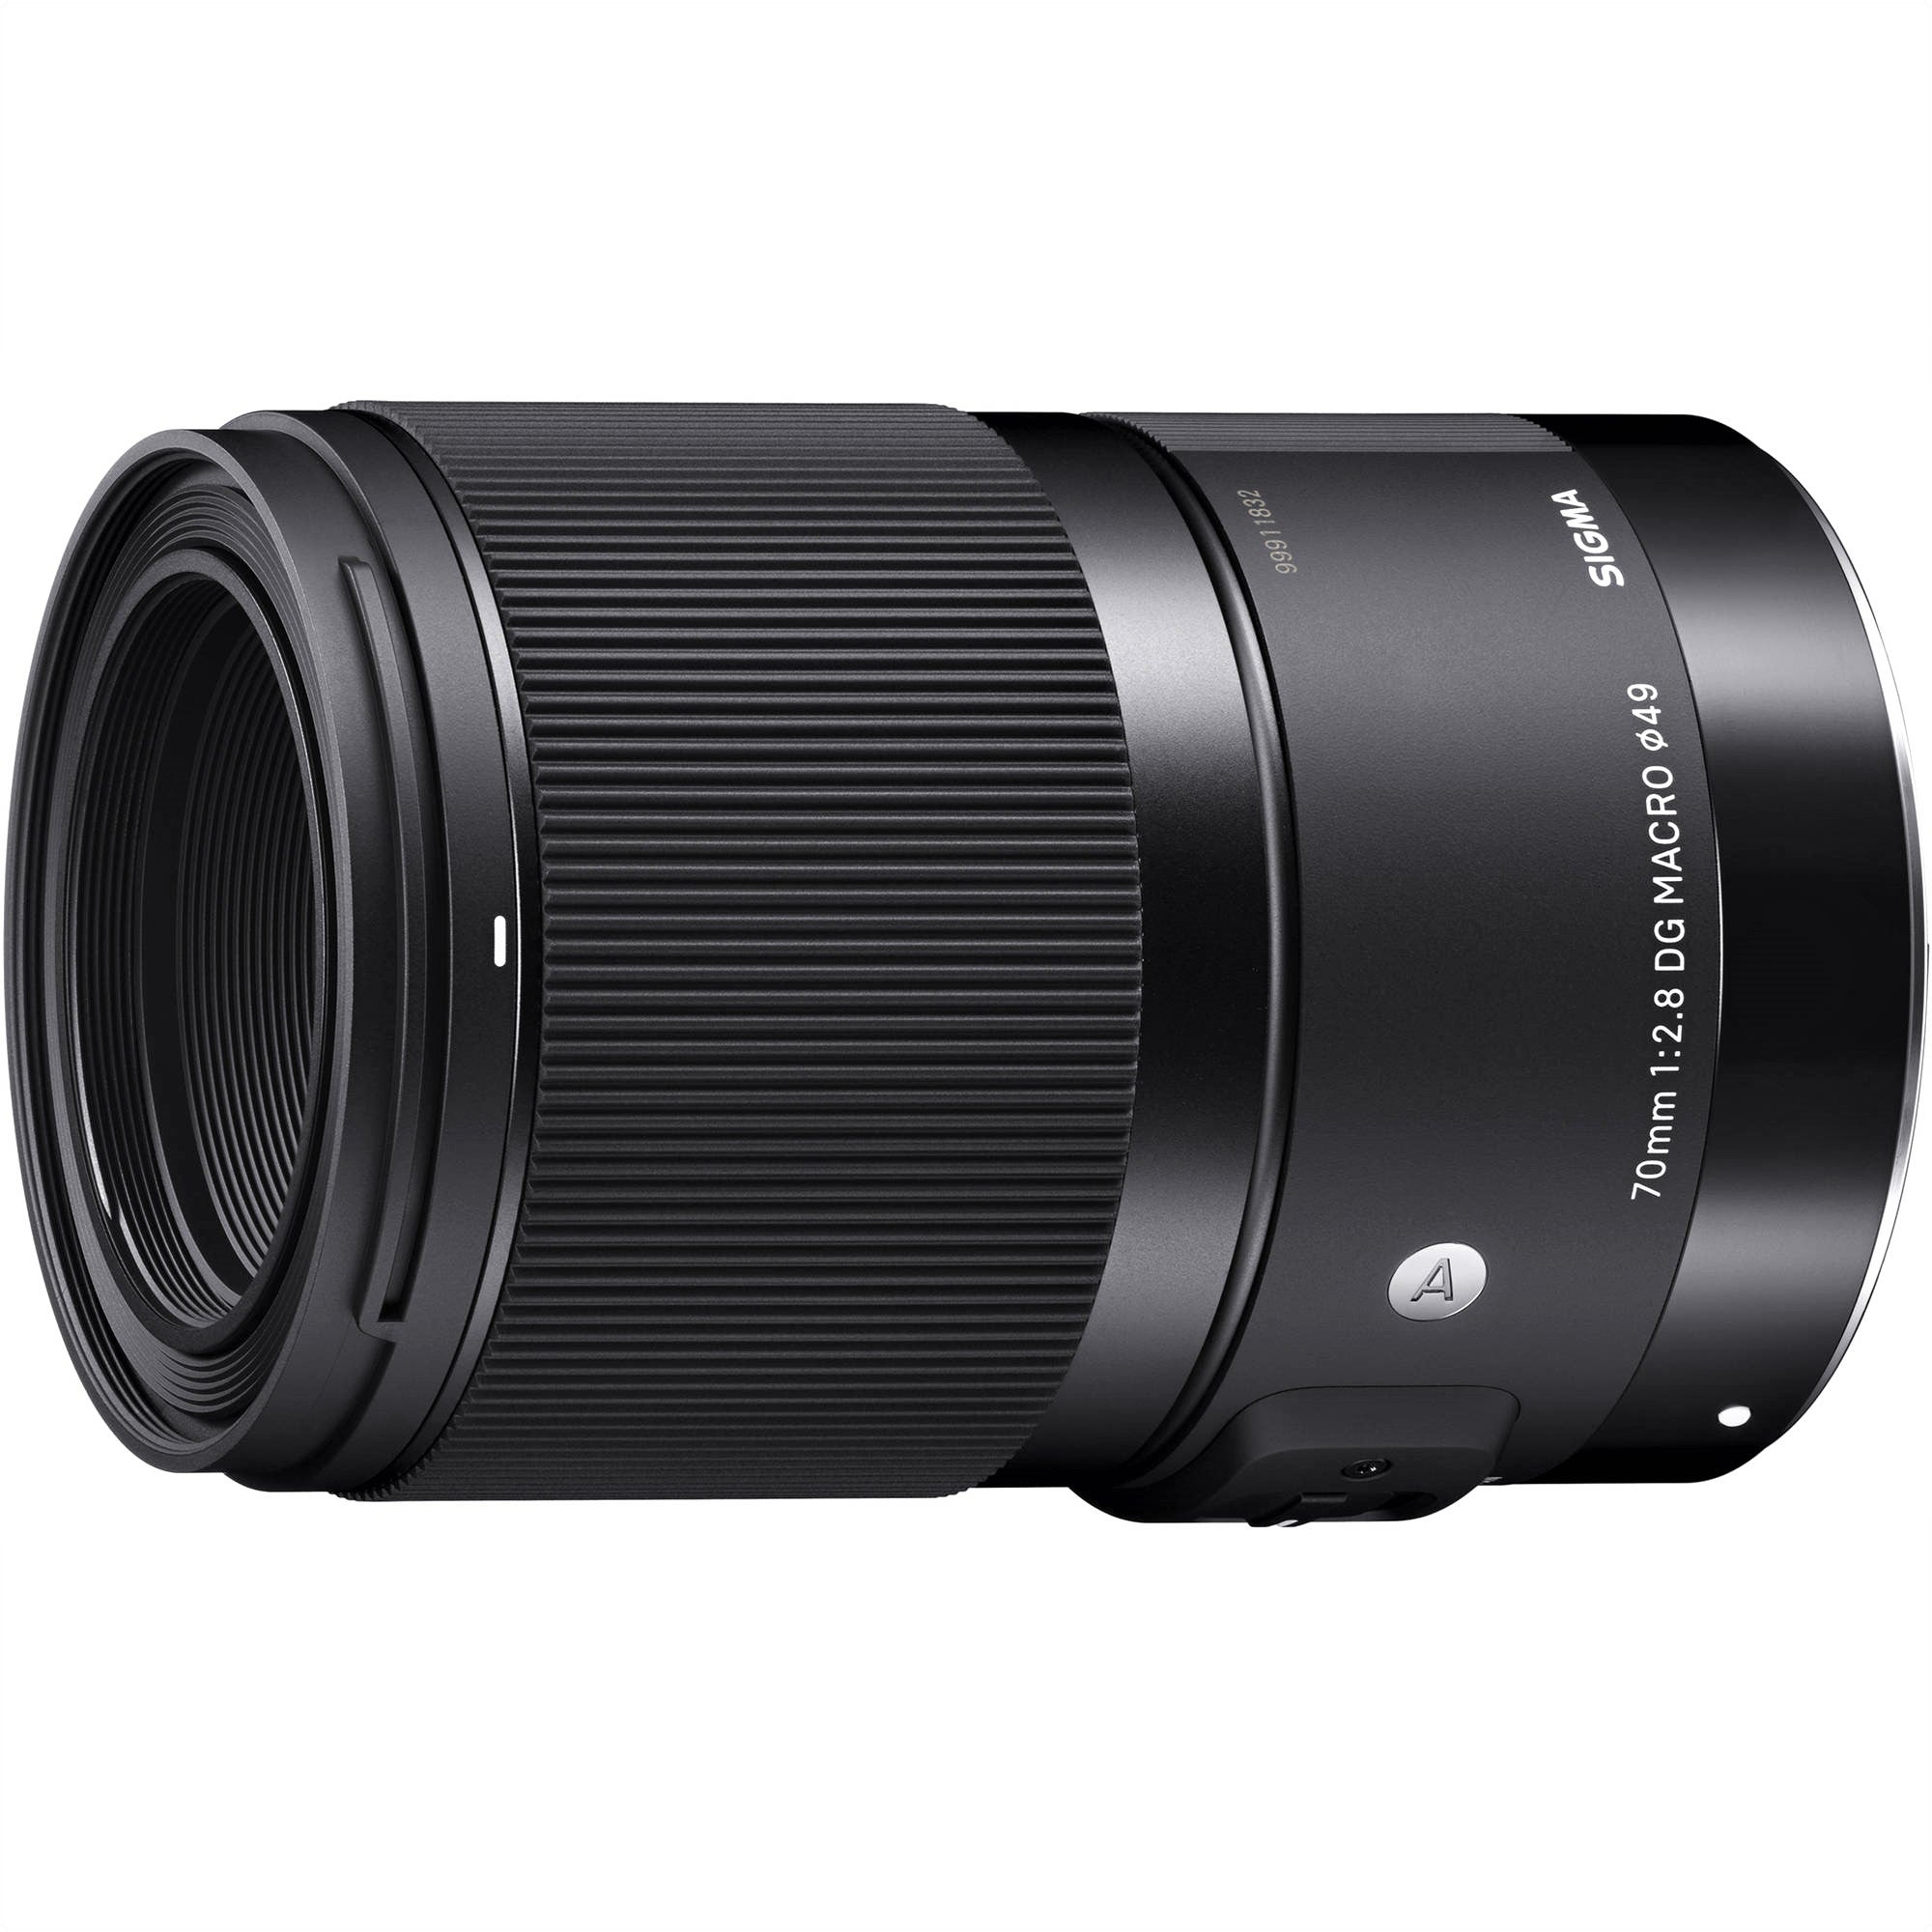 Sigma 70mm F2.8 DG Macro Art Lens for Sigma SA in a Side View